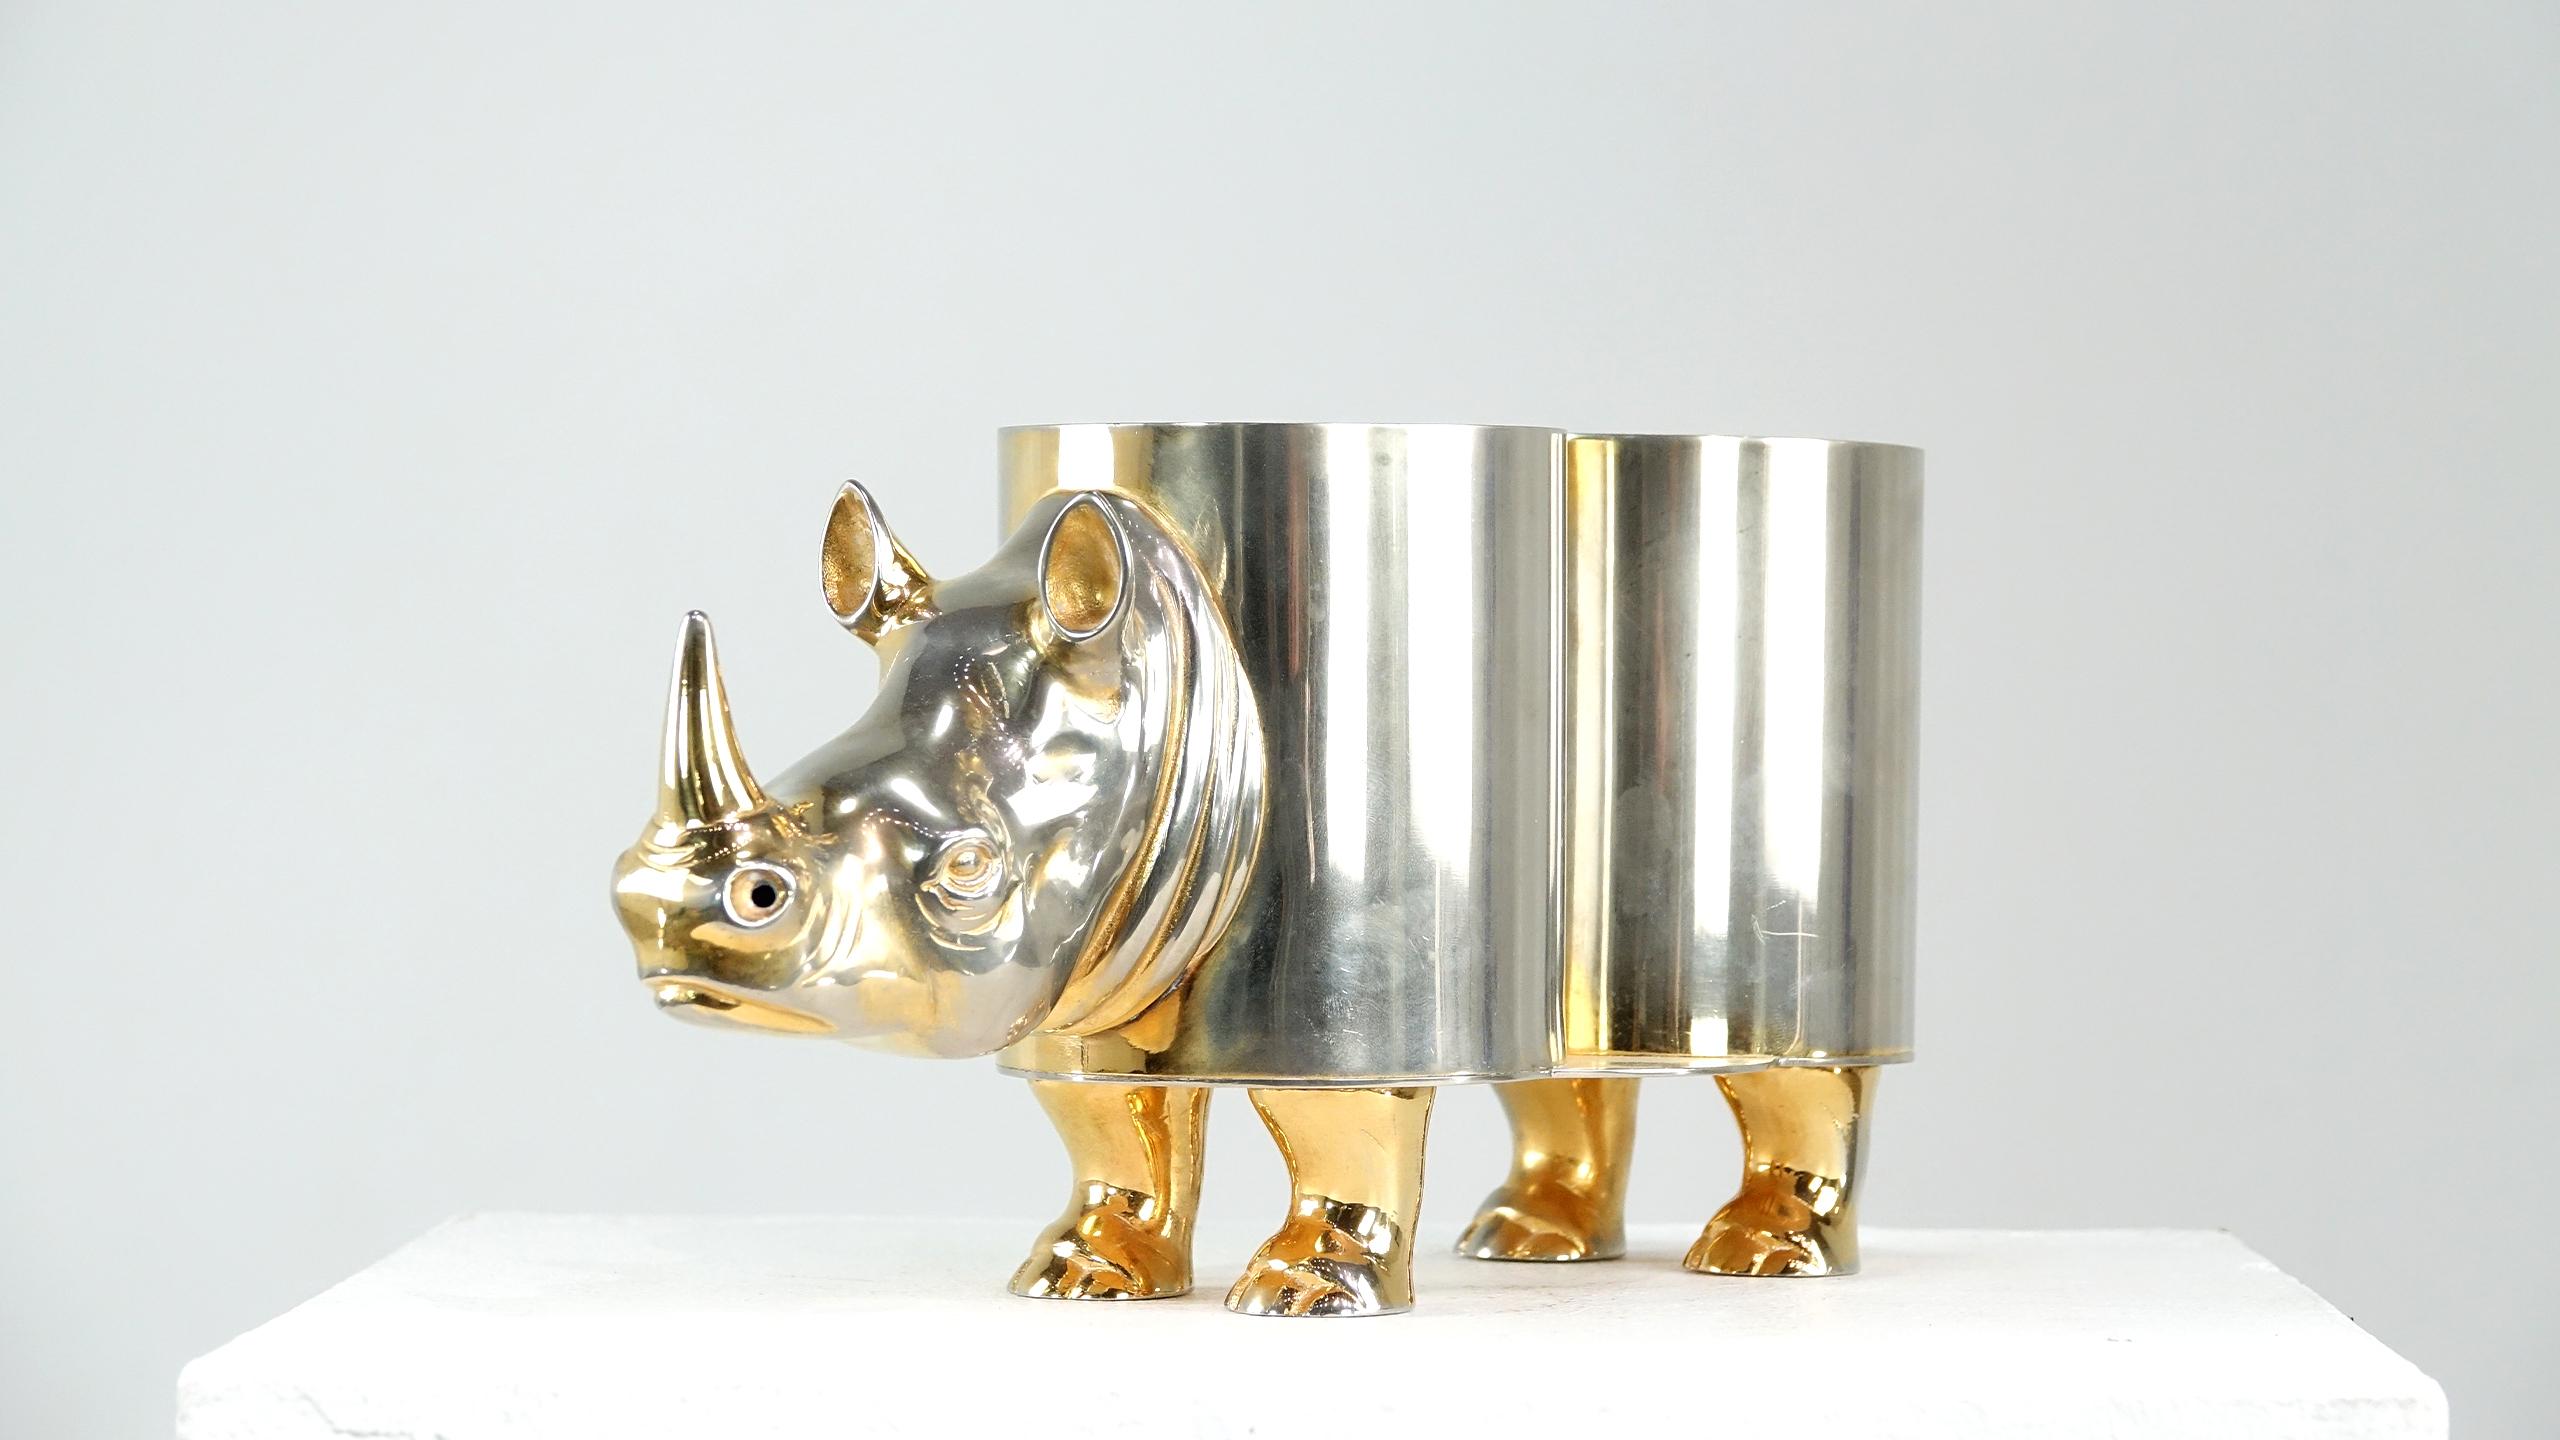 Fabulous and rare Italian Hollywood Regency rhinoceros double wine bottle holder.
Two colors to the brass, head and feet have a gold tone the rest of the body is nickel on brass.